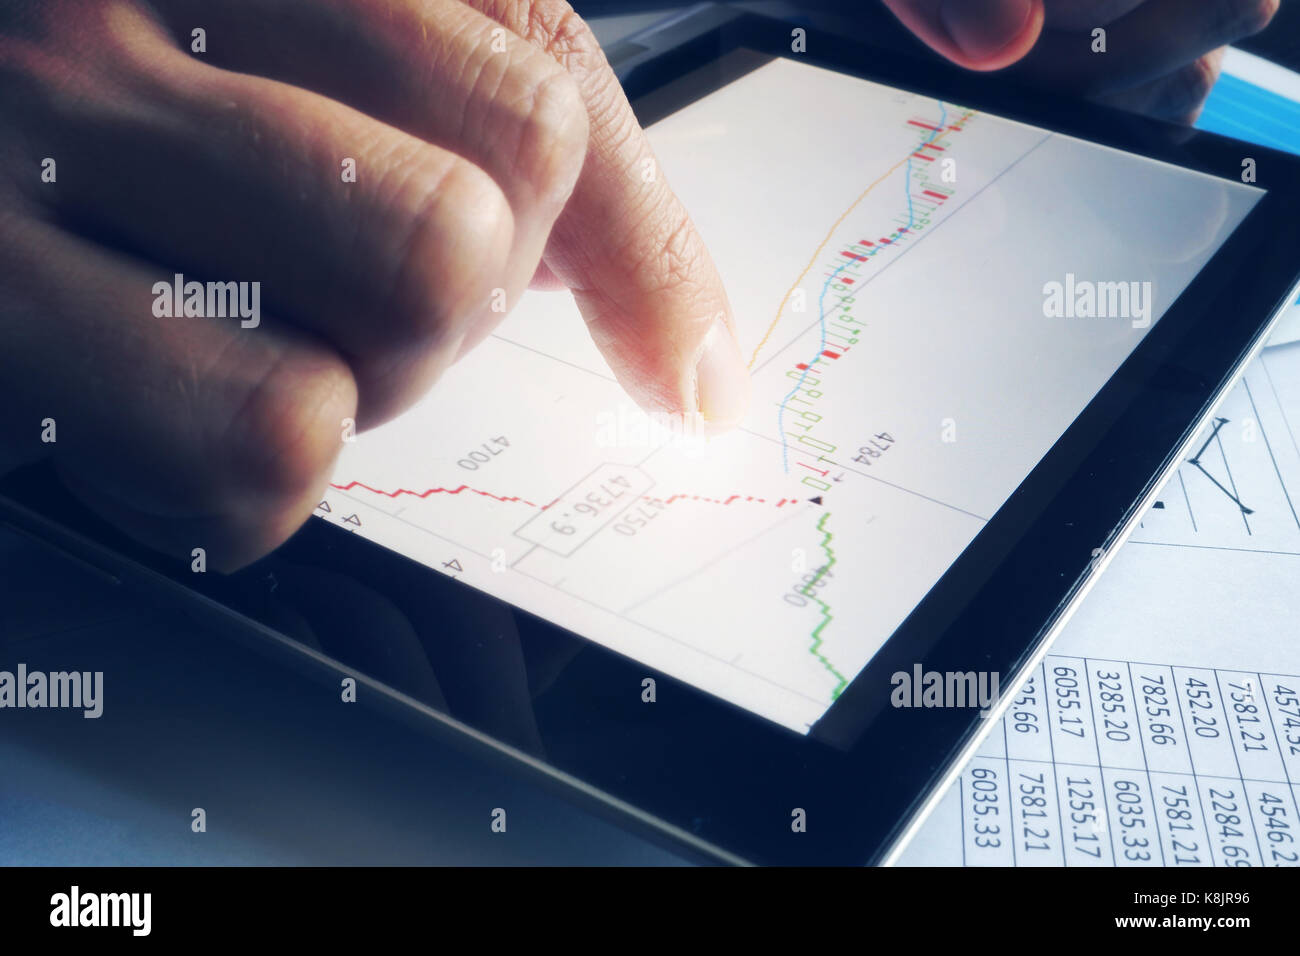 Stock broker holding tablet with candle stick graph. Trading stocks online. Stock Photo